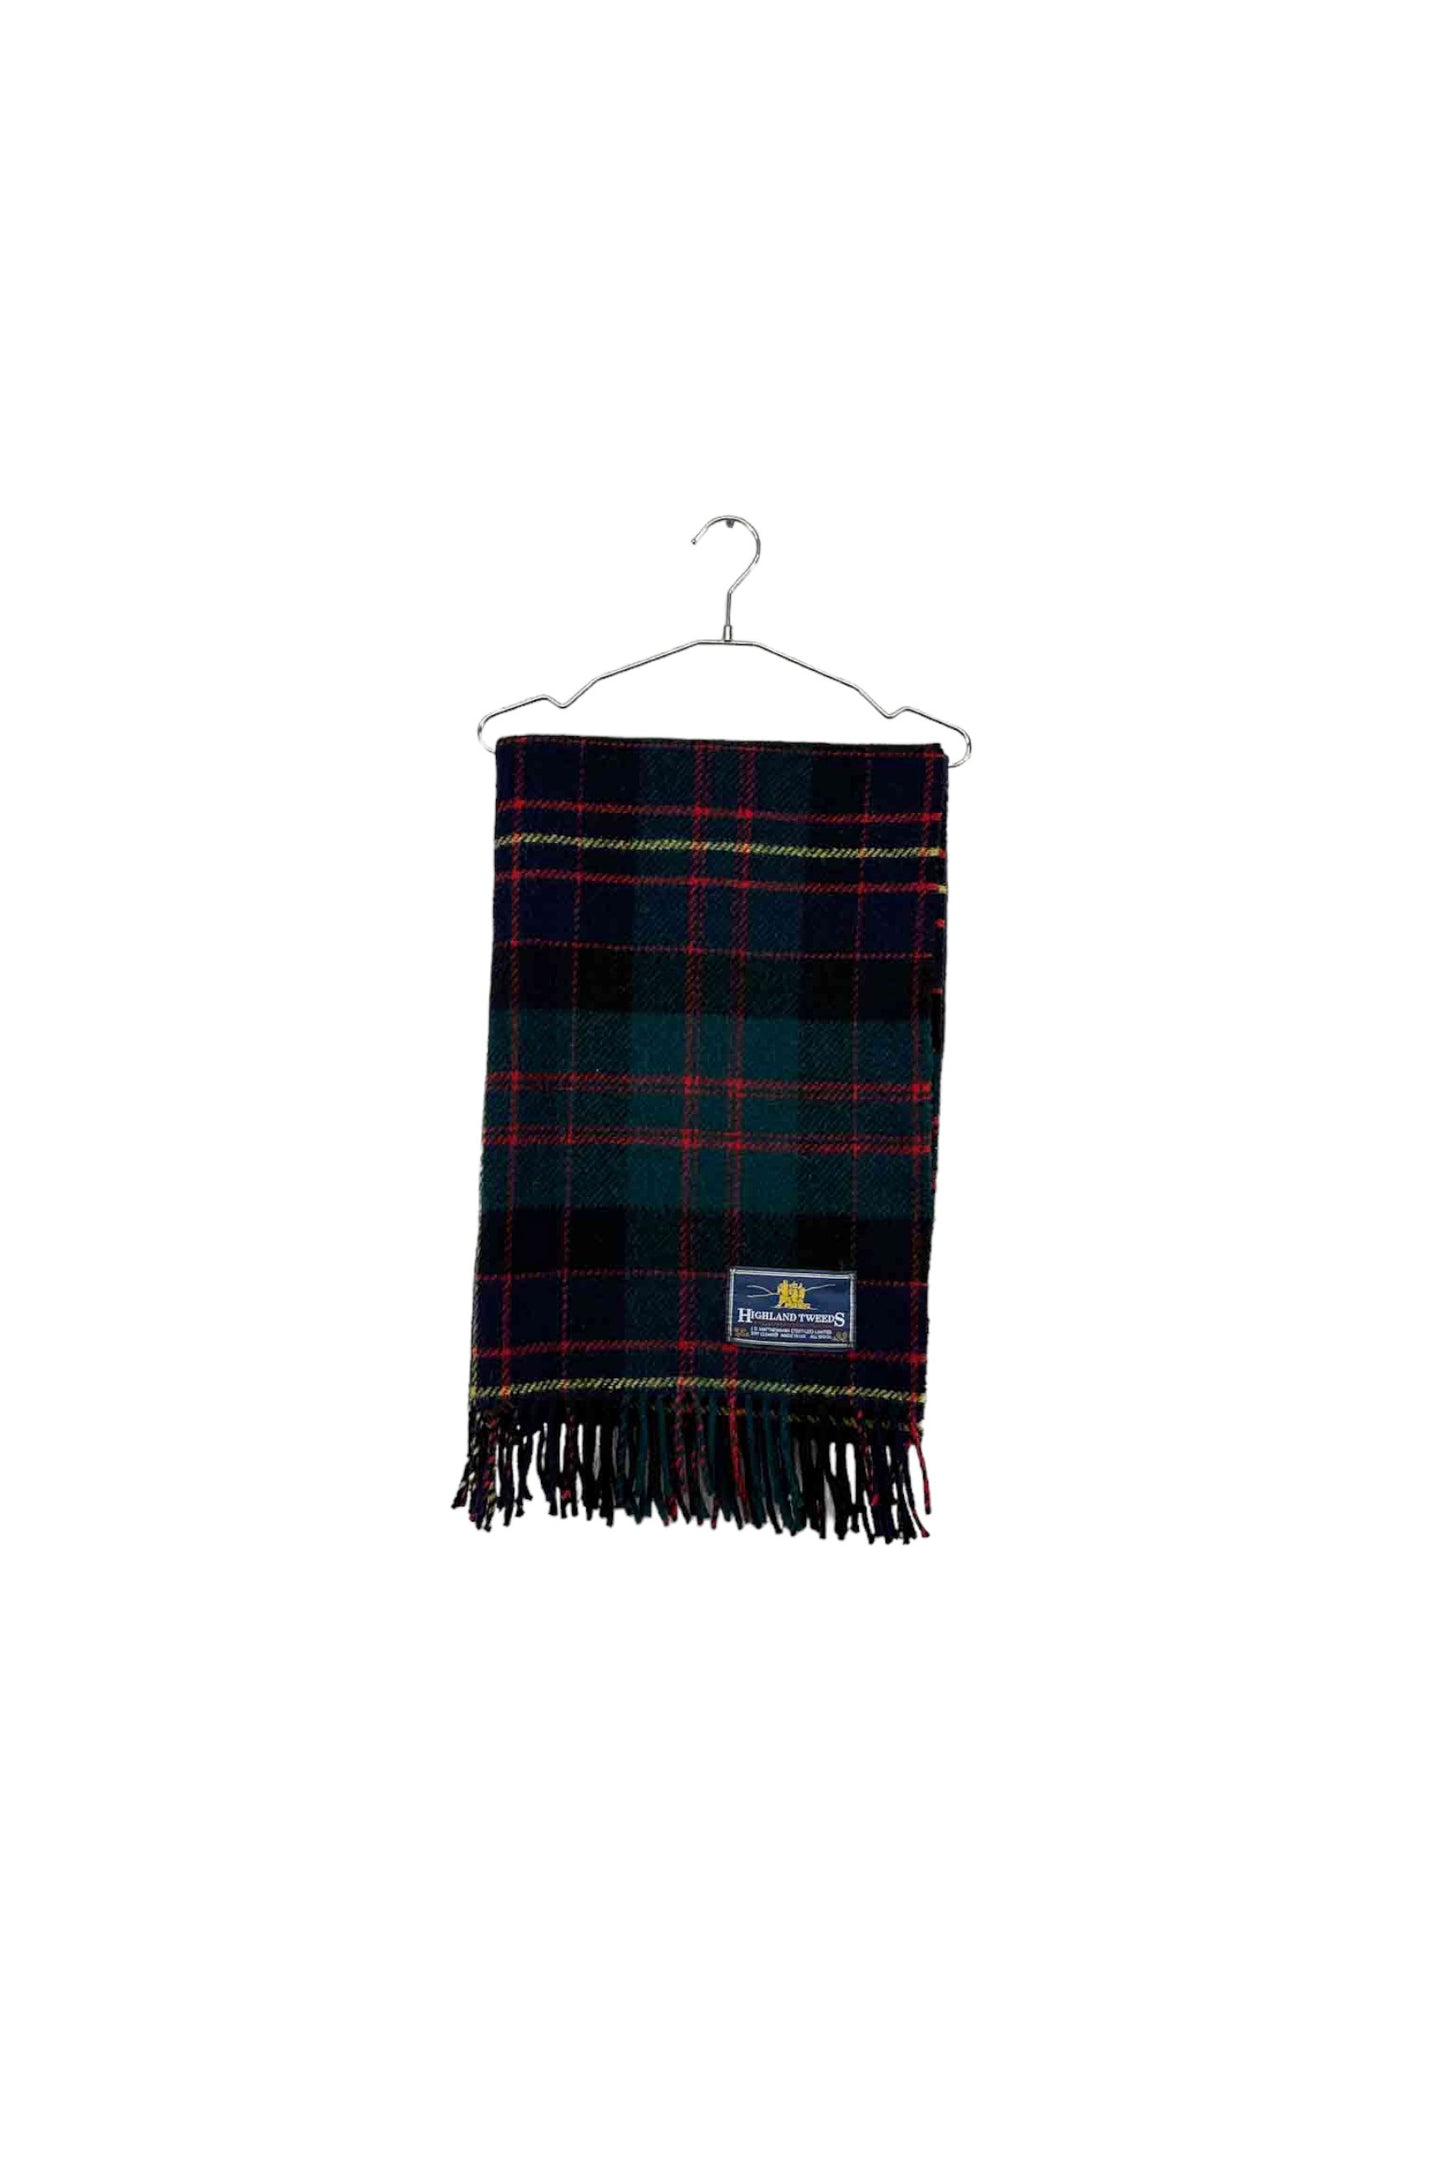 Made in the UK HIGHLAND TWEEDS travel rugs